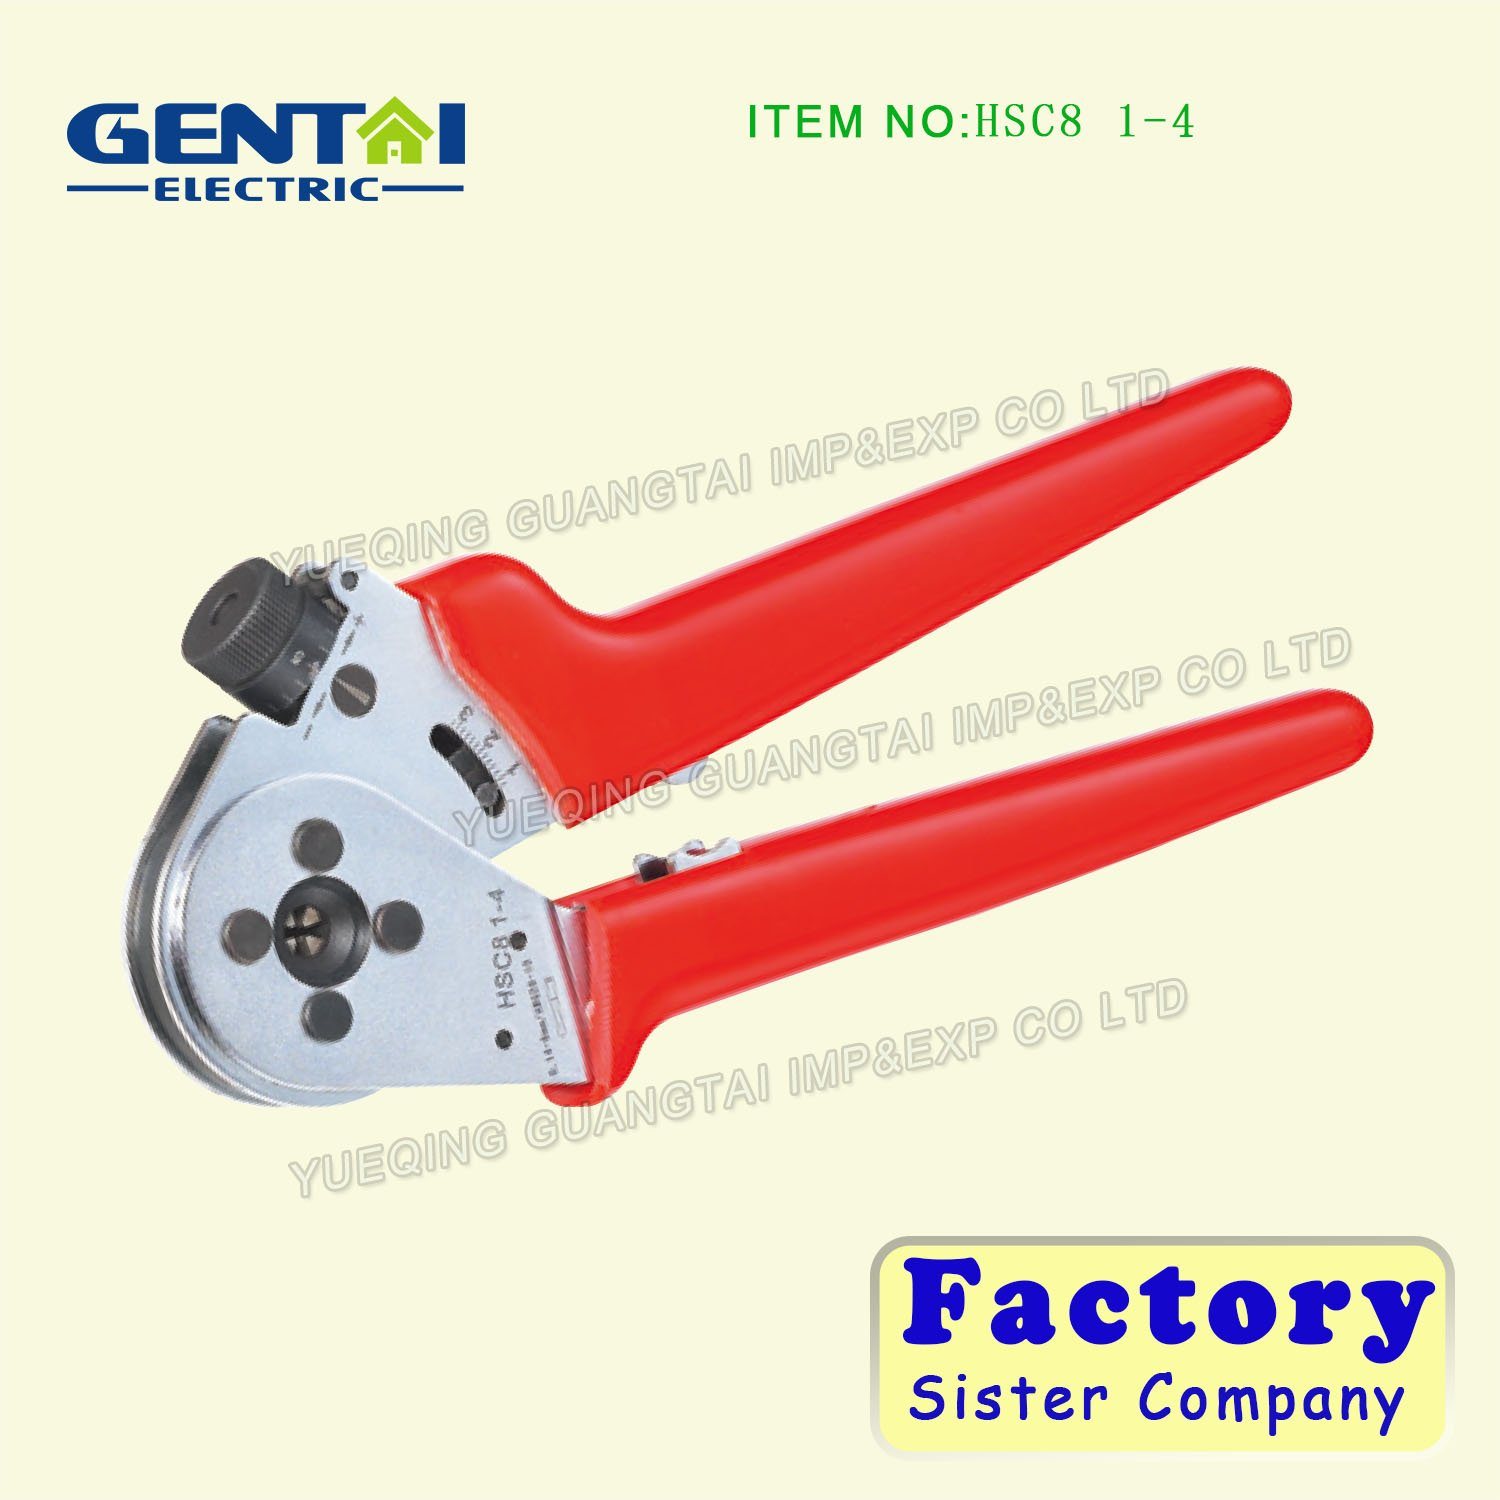 Hsc8 1-4 Four-Mandrel Crimping Pliers for Turned Contacts